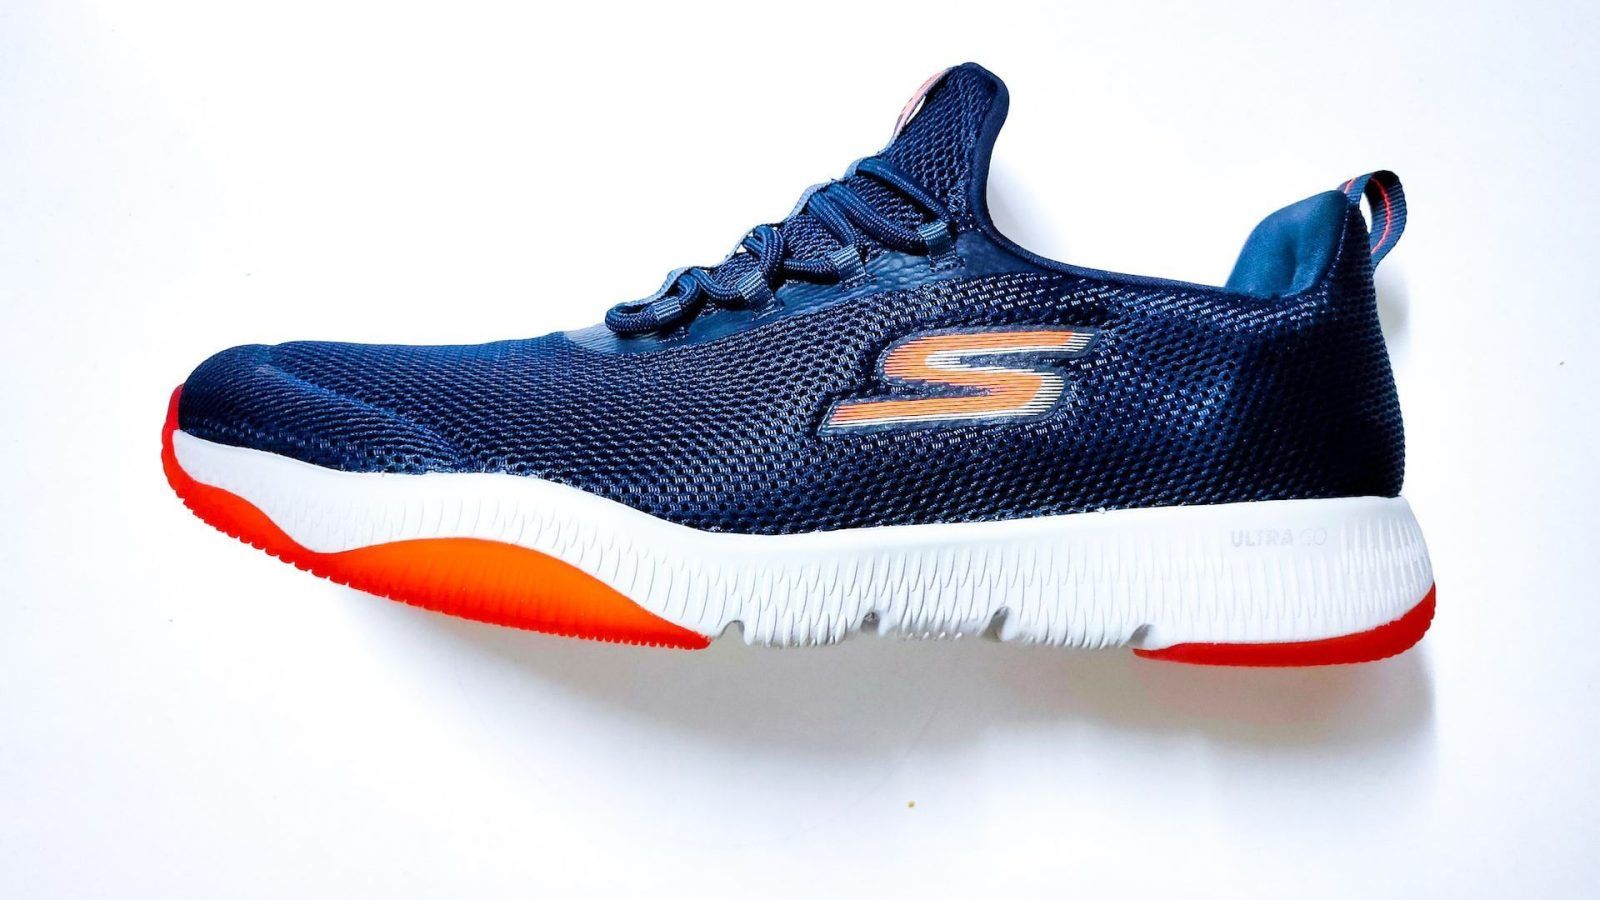 The Skechers sneakers for men to amp up your